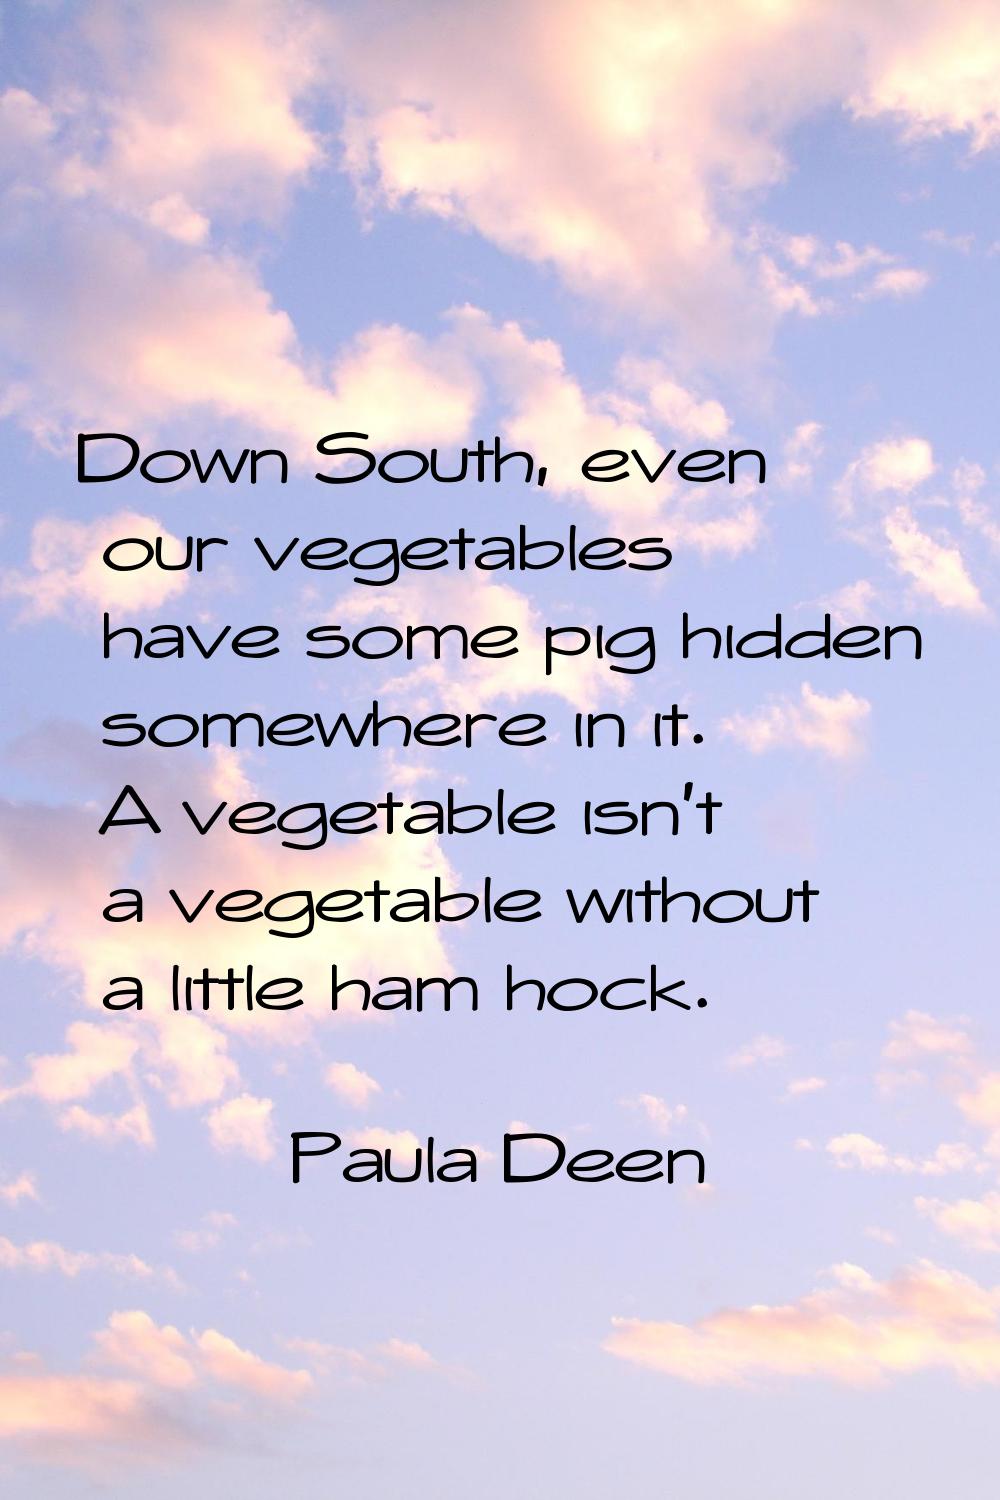 Down South, even our vegetables have some pig hidden somewhere in it. A vegetable isn't a vegetable